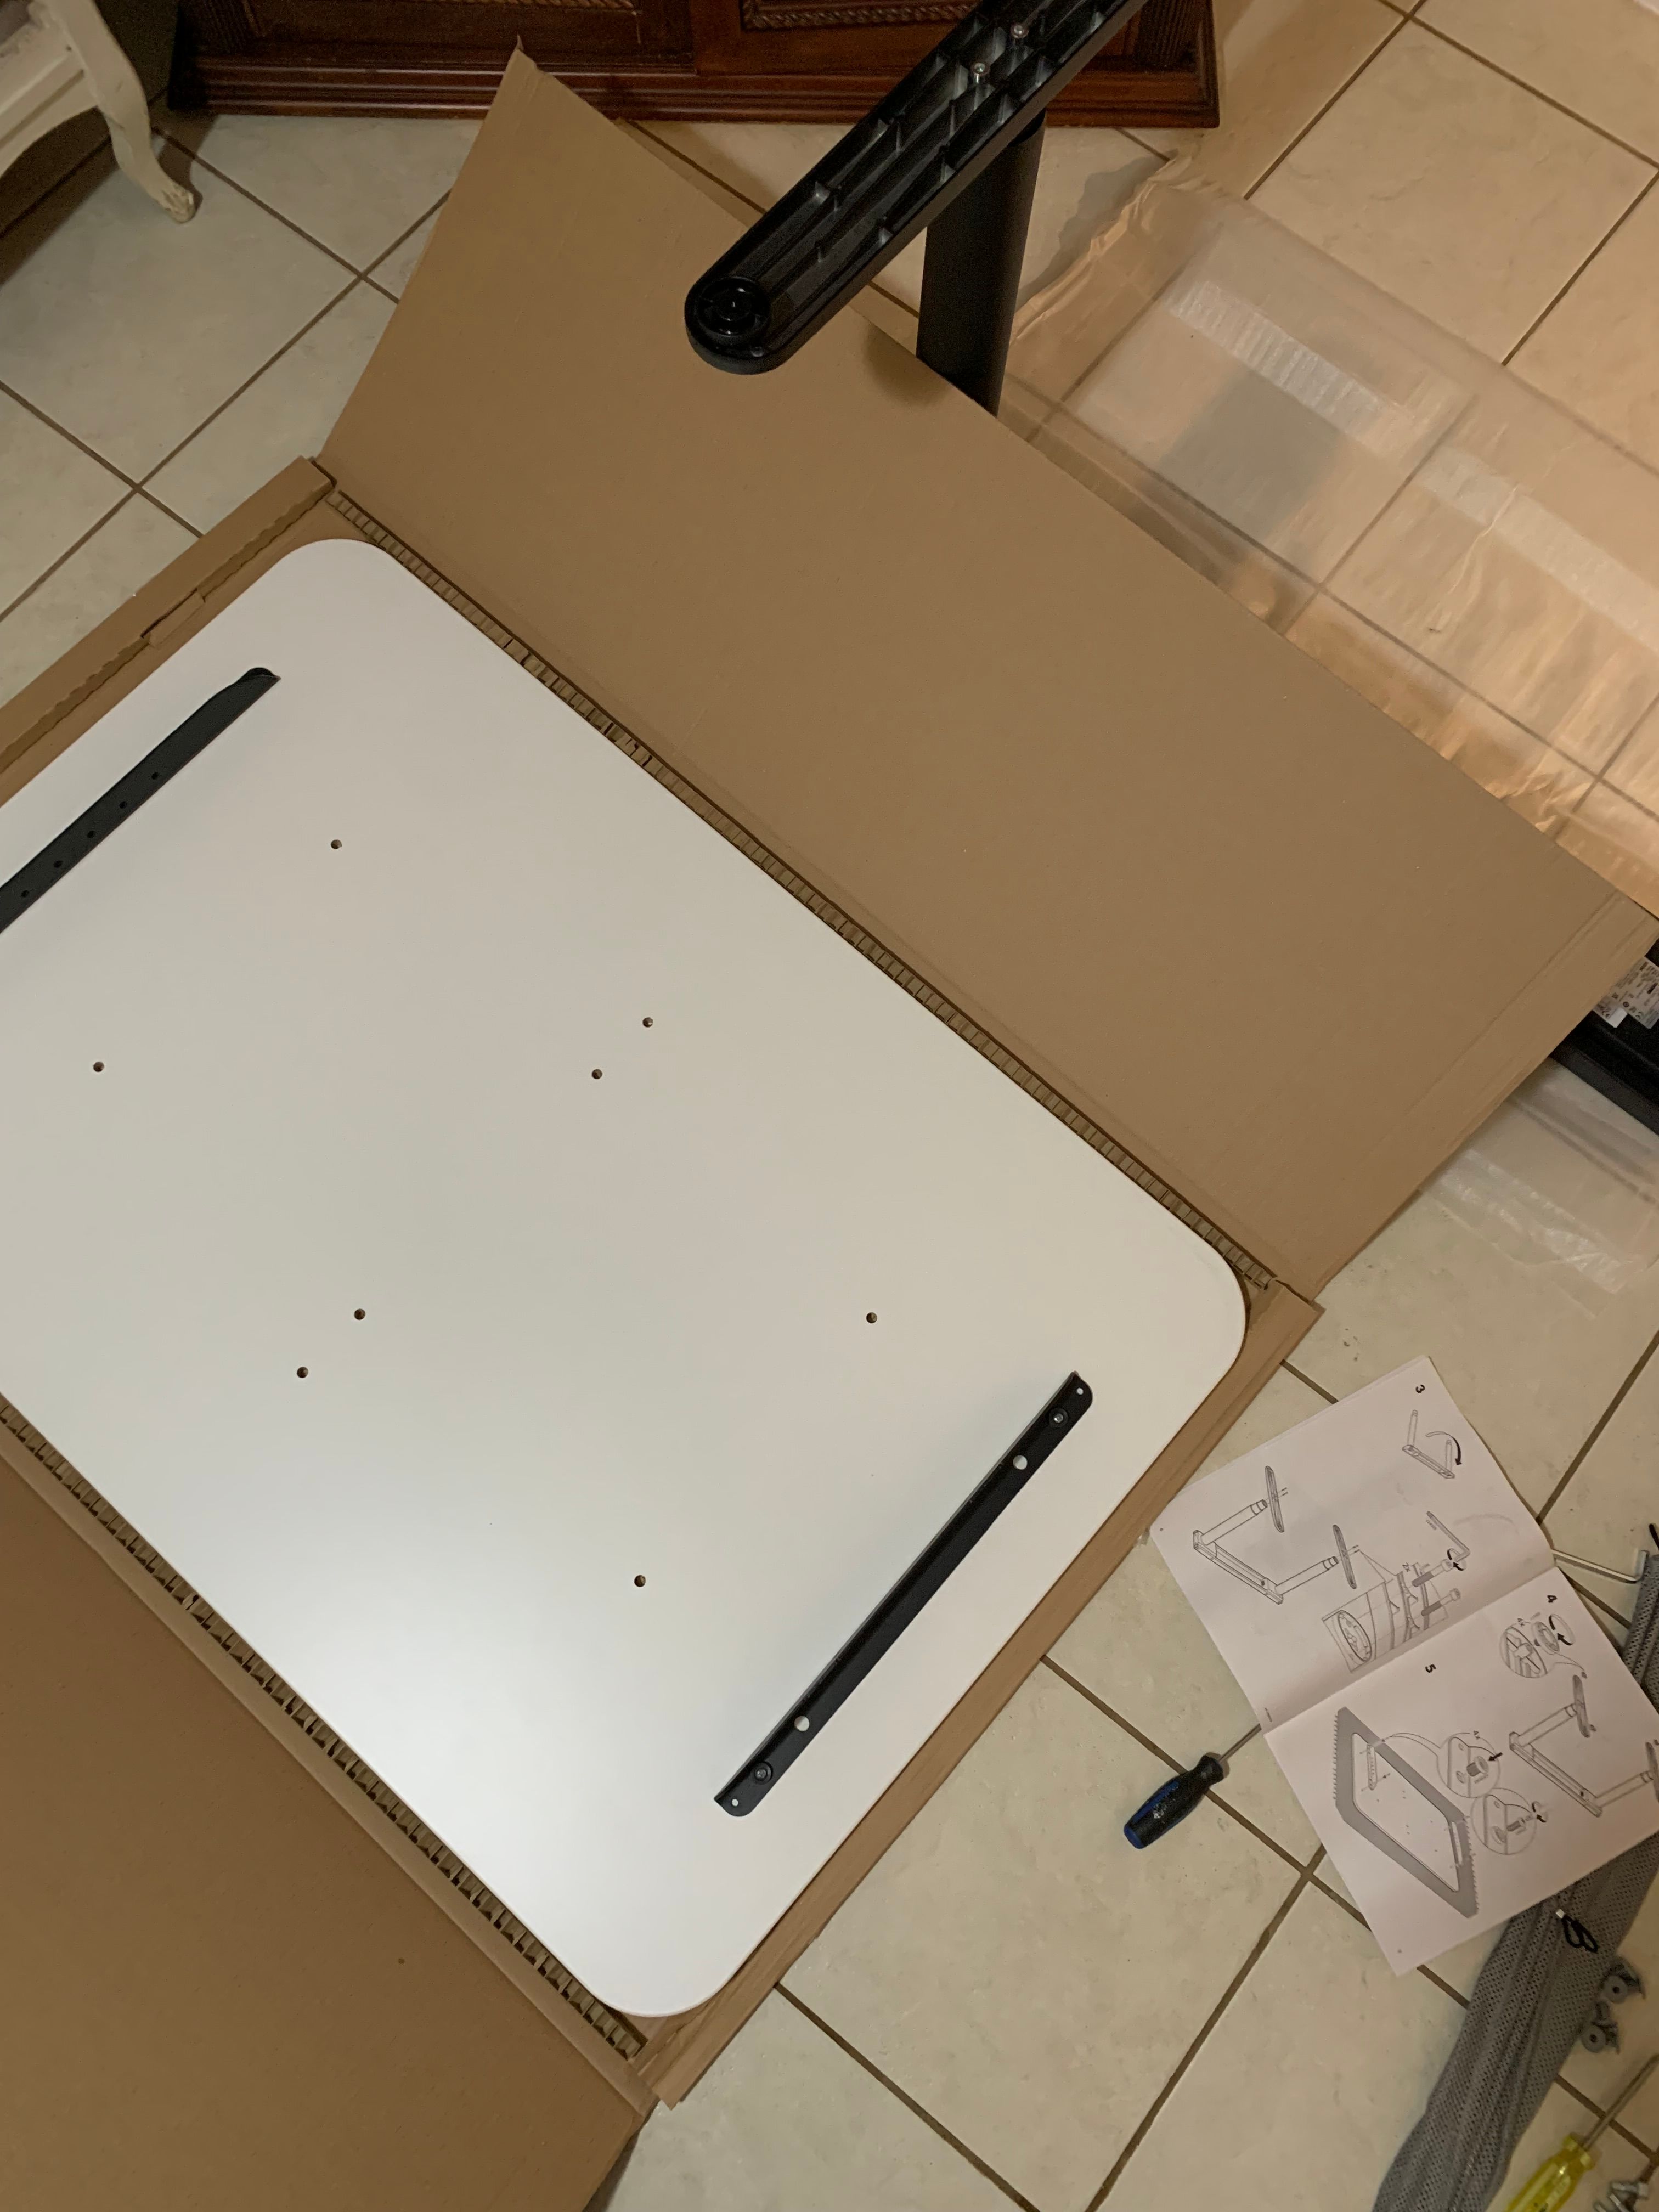 Flexispot E7 Standing Desk Review: How Does It Compare To The IKEA Bekant?